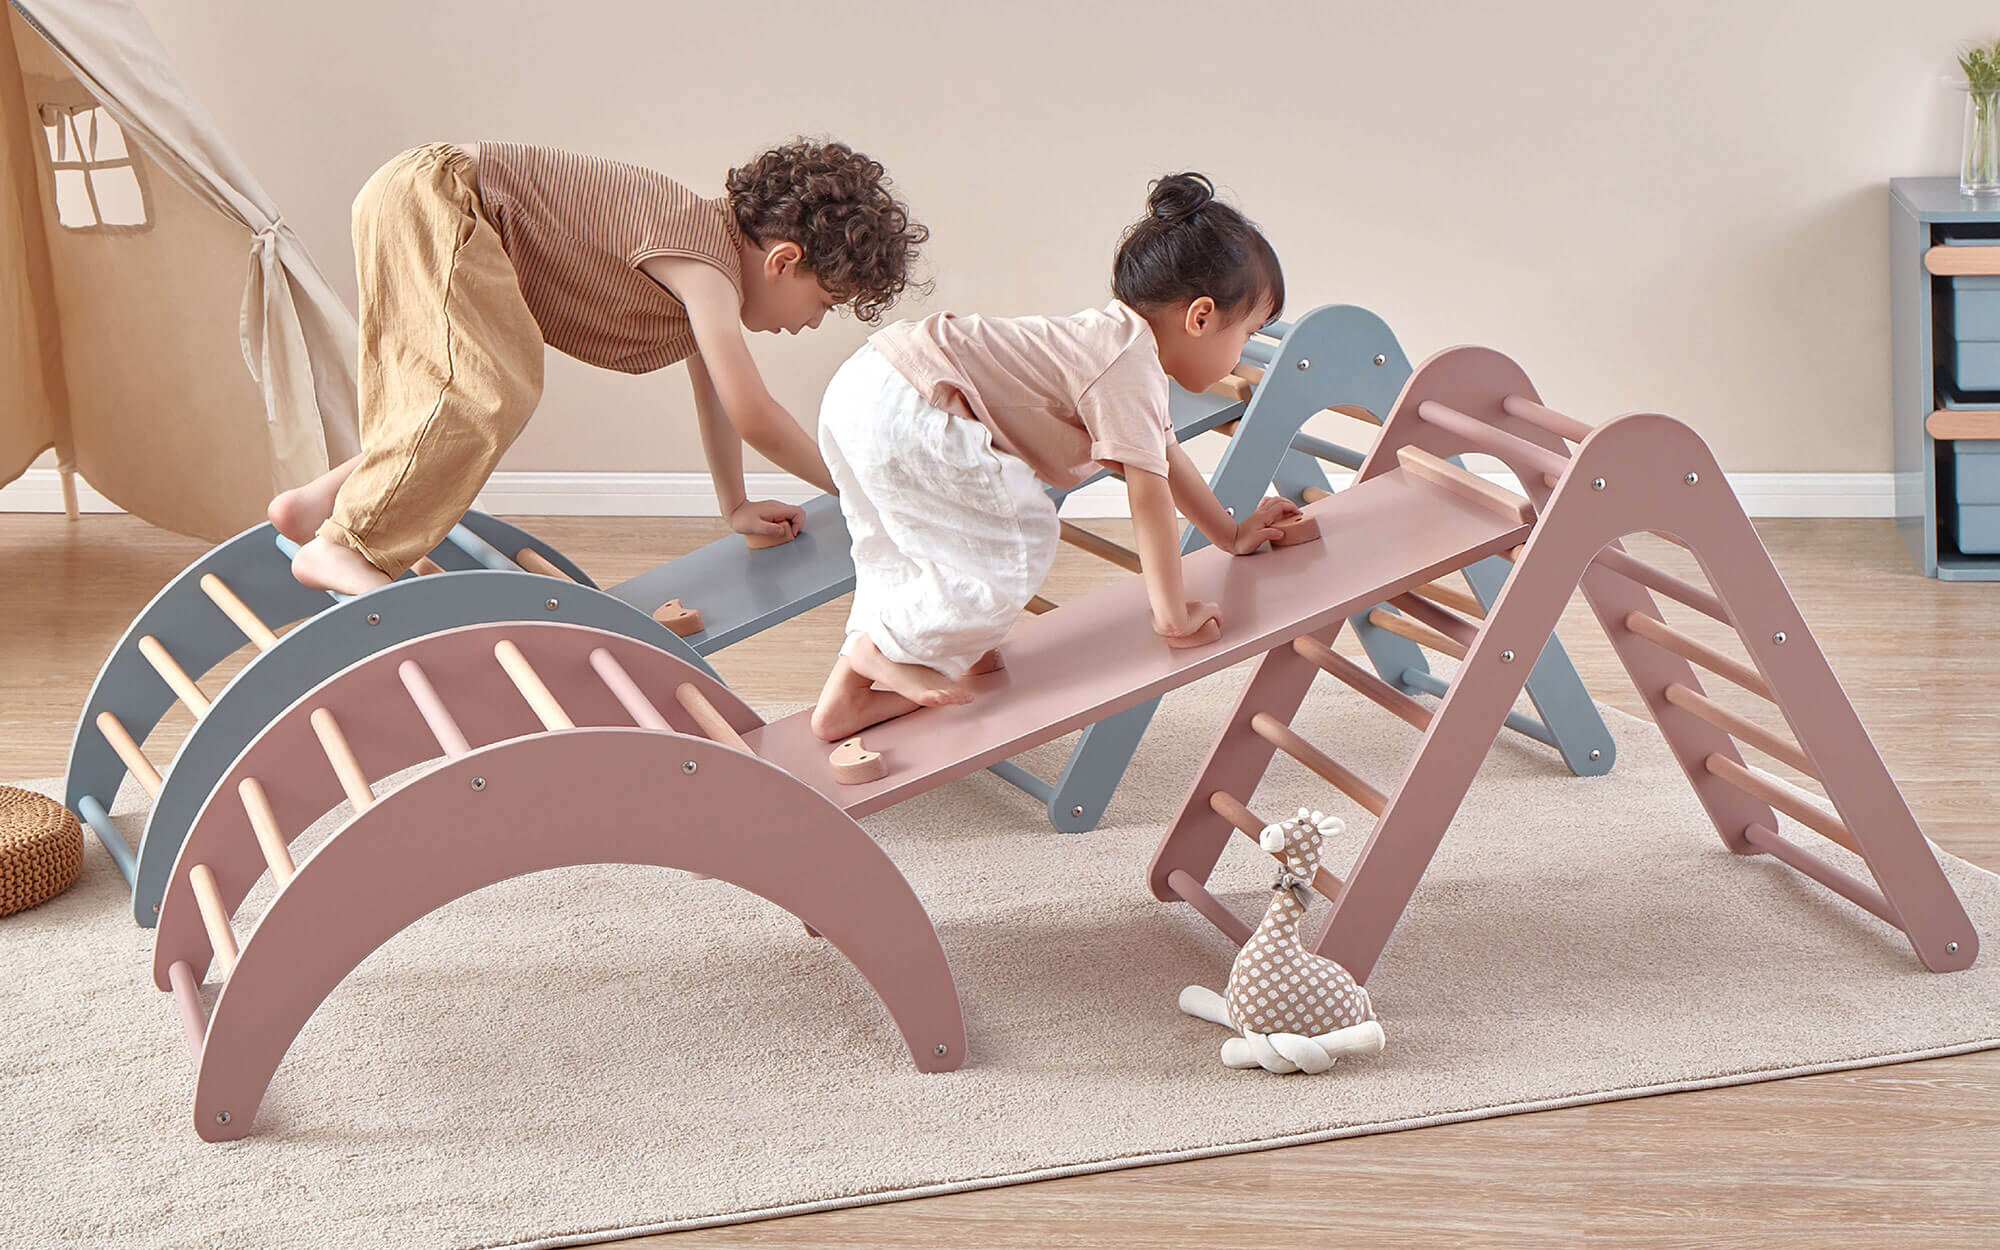 Children playing with Tidy Climbing furniture